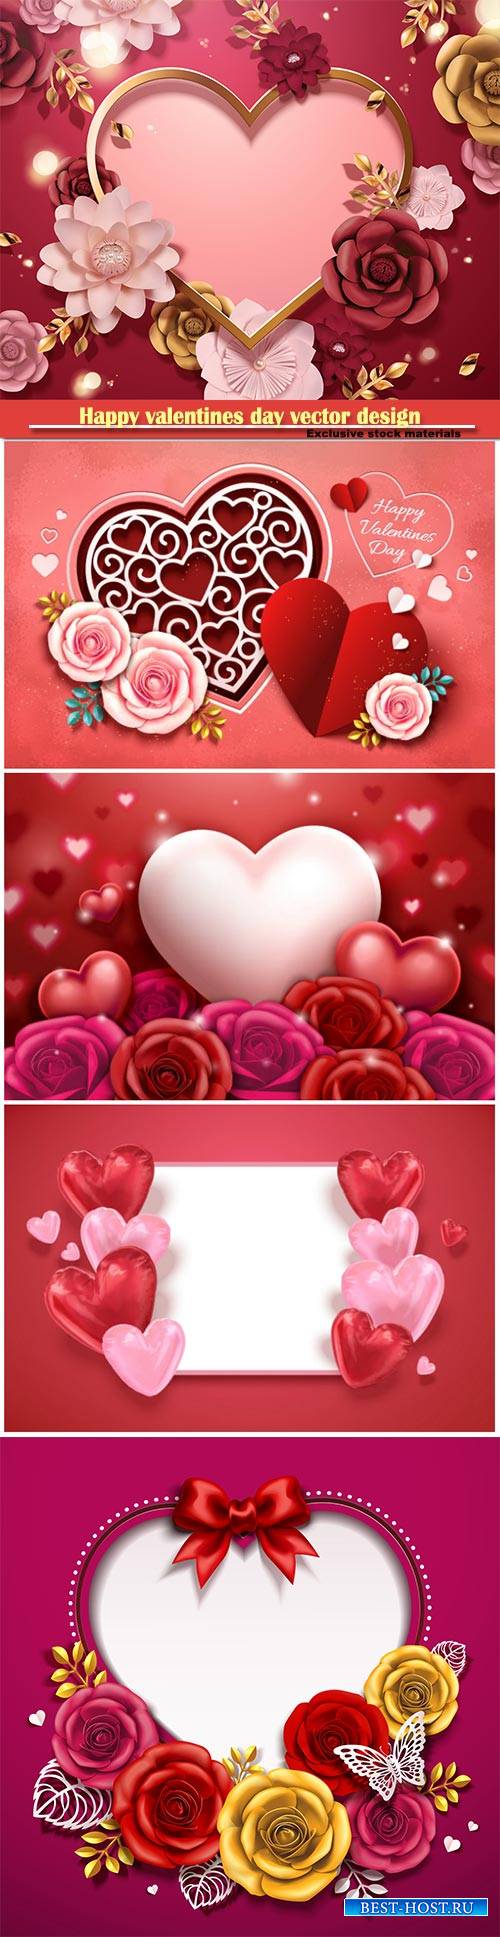 Happy valentines day vector design with heart, balloons, roses in 3d illust ...